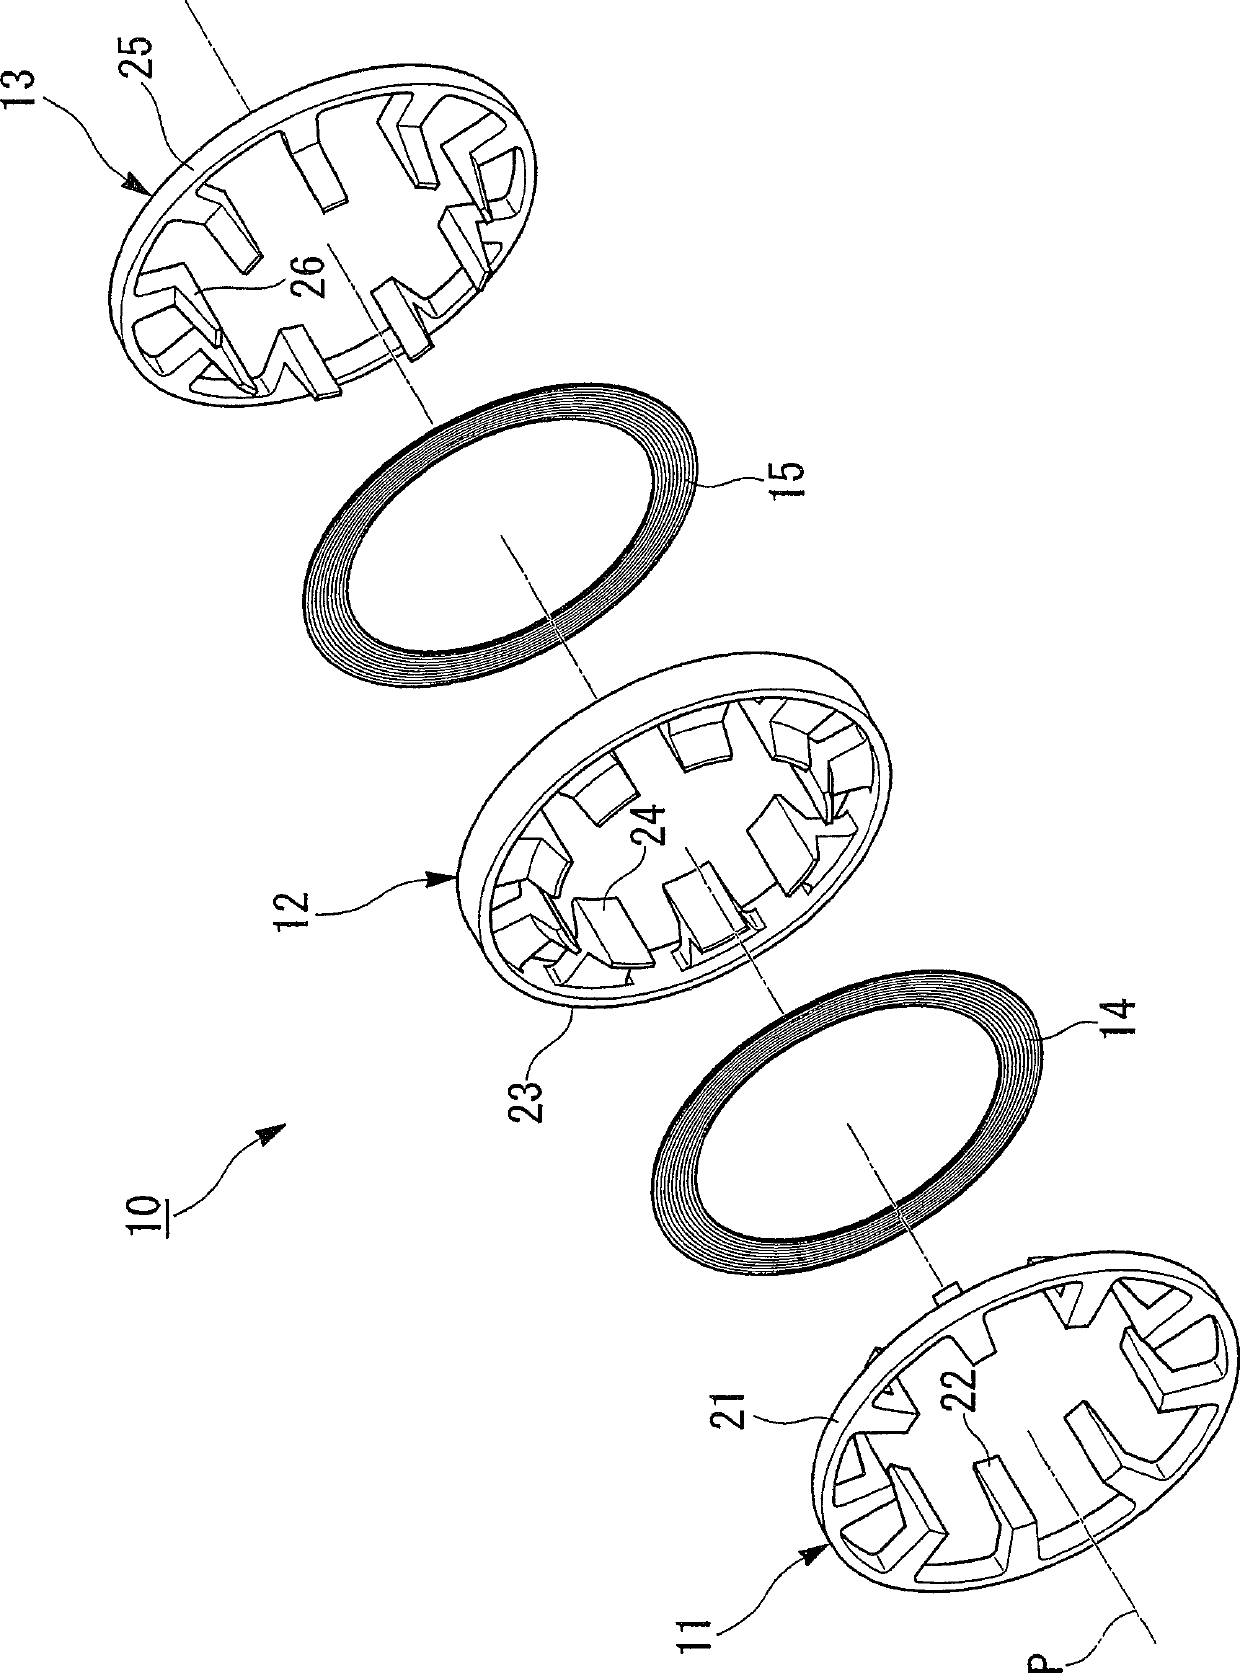 Stator, motor, and method of manufacturing such stator